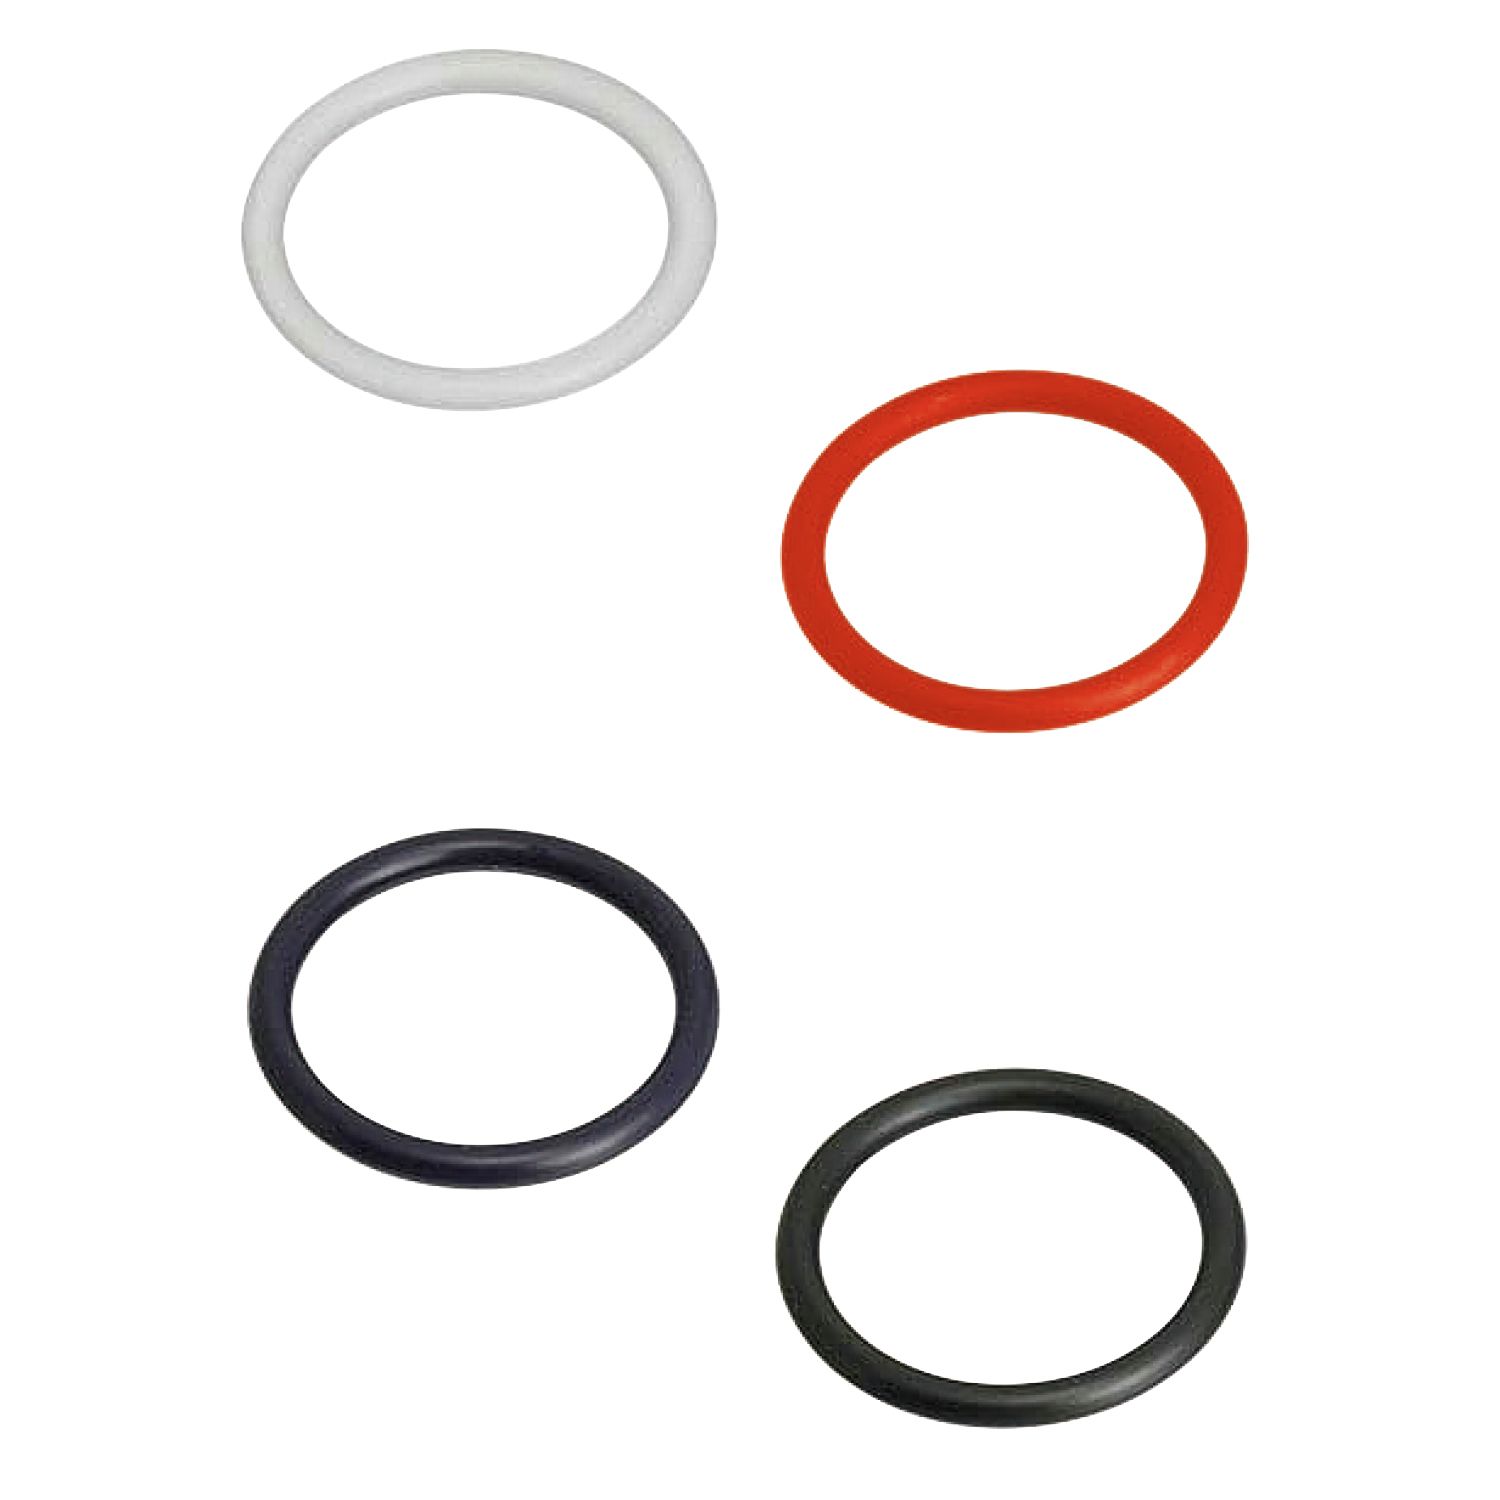 O-Rings - for Special Sizing, S Series